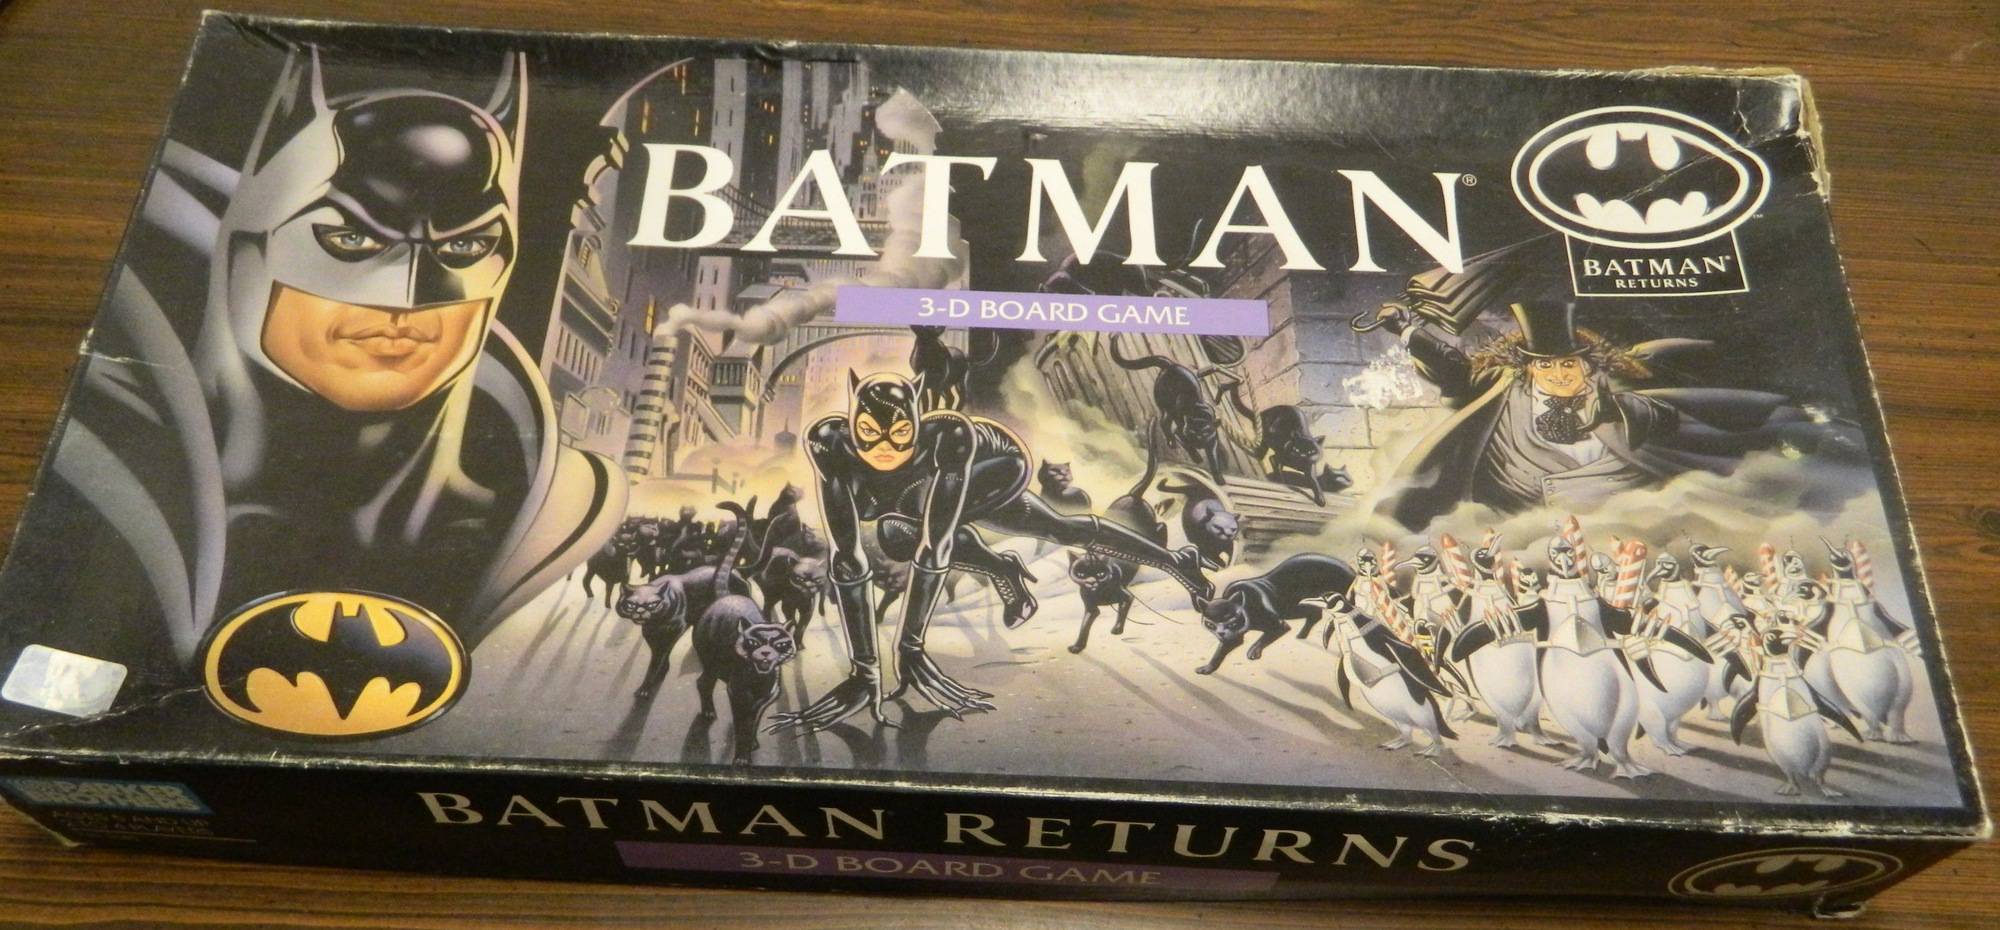 Batman Returns 3-D Board Game Review and Rules